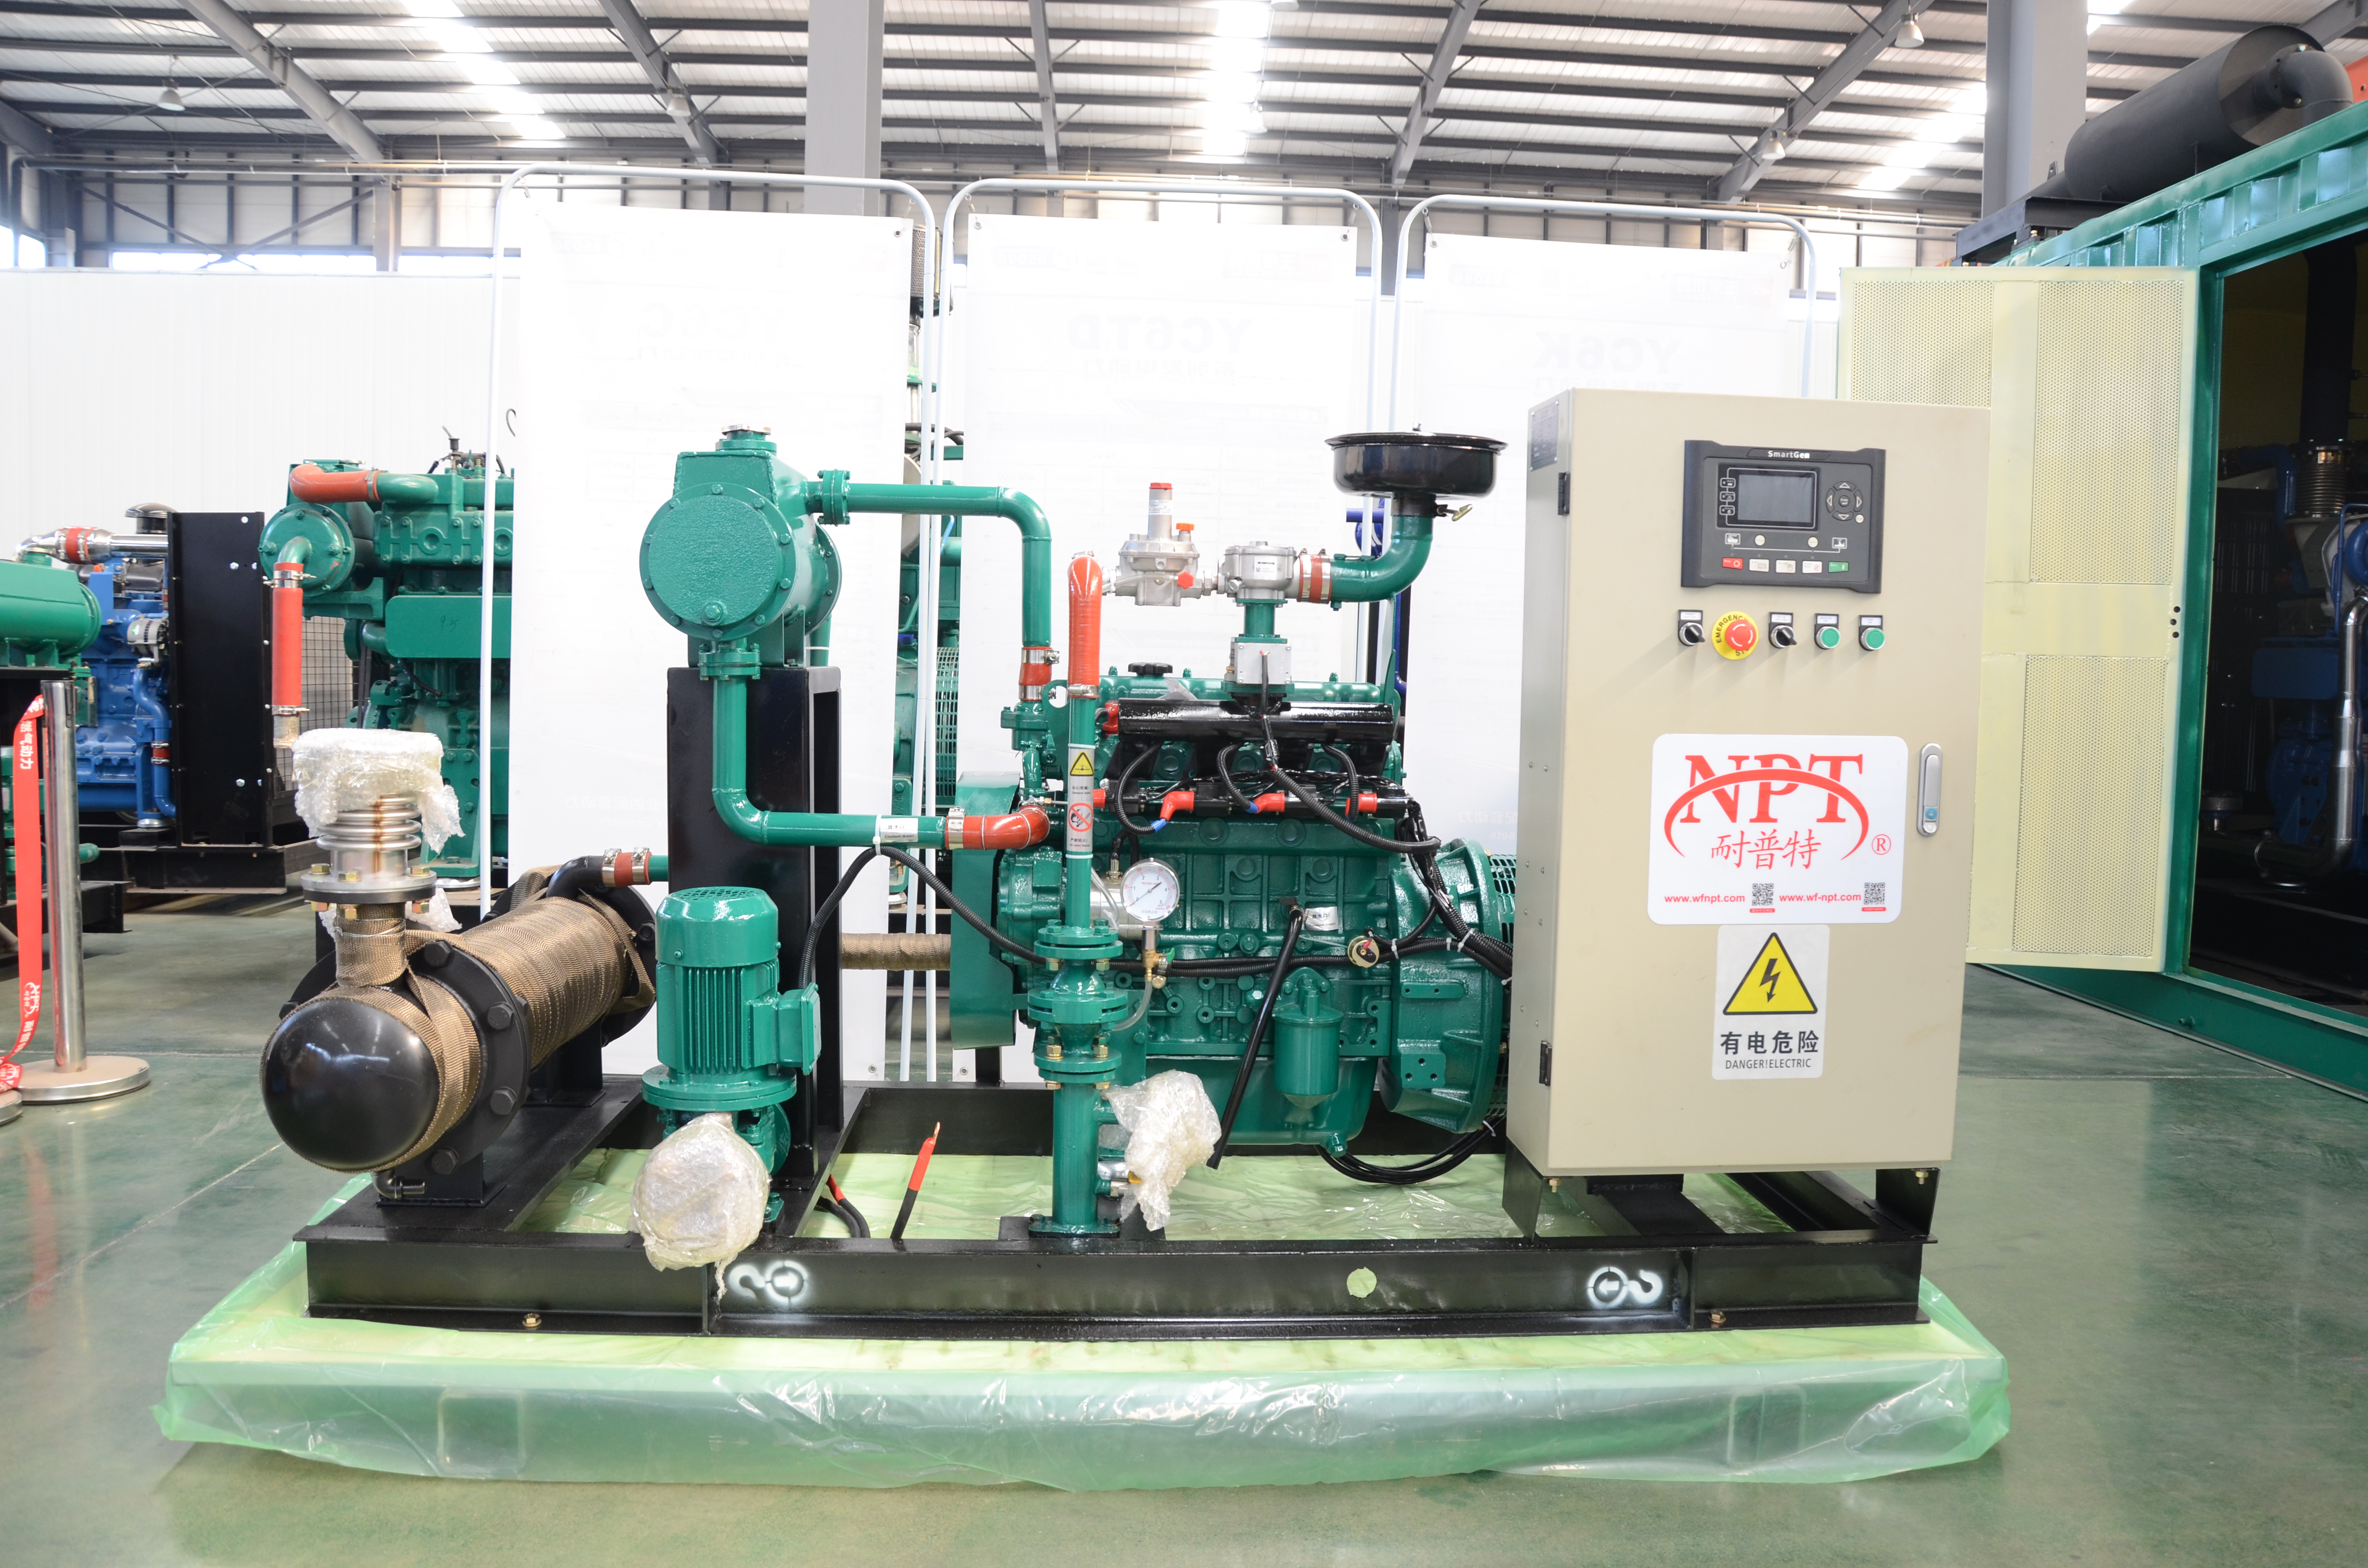 How to operate gas generator set safely